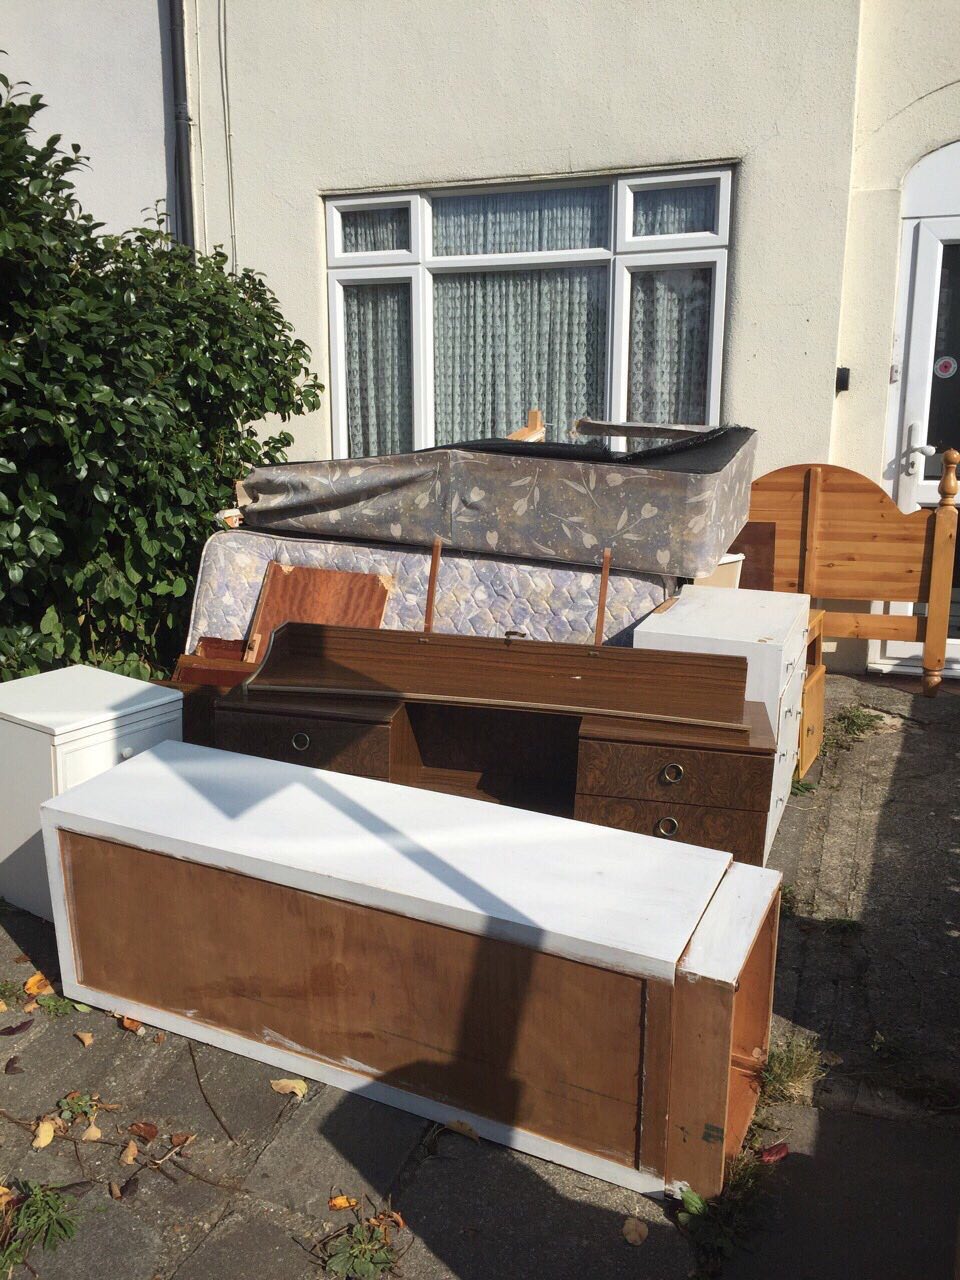 N22 waste removal Bounds Green